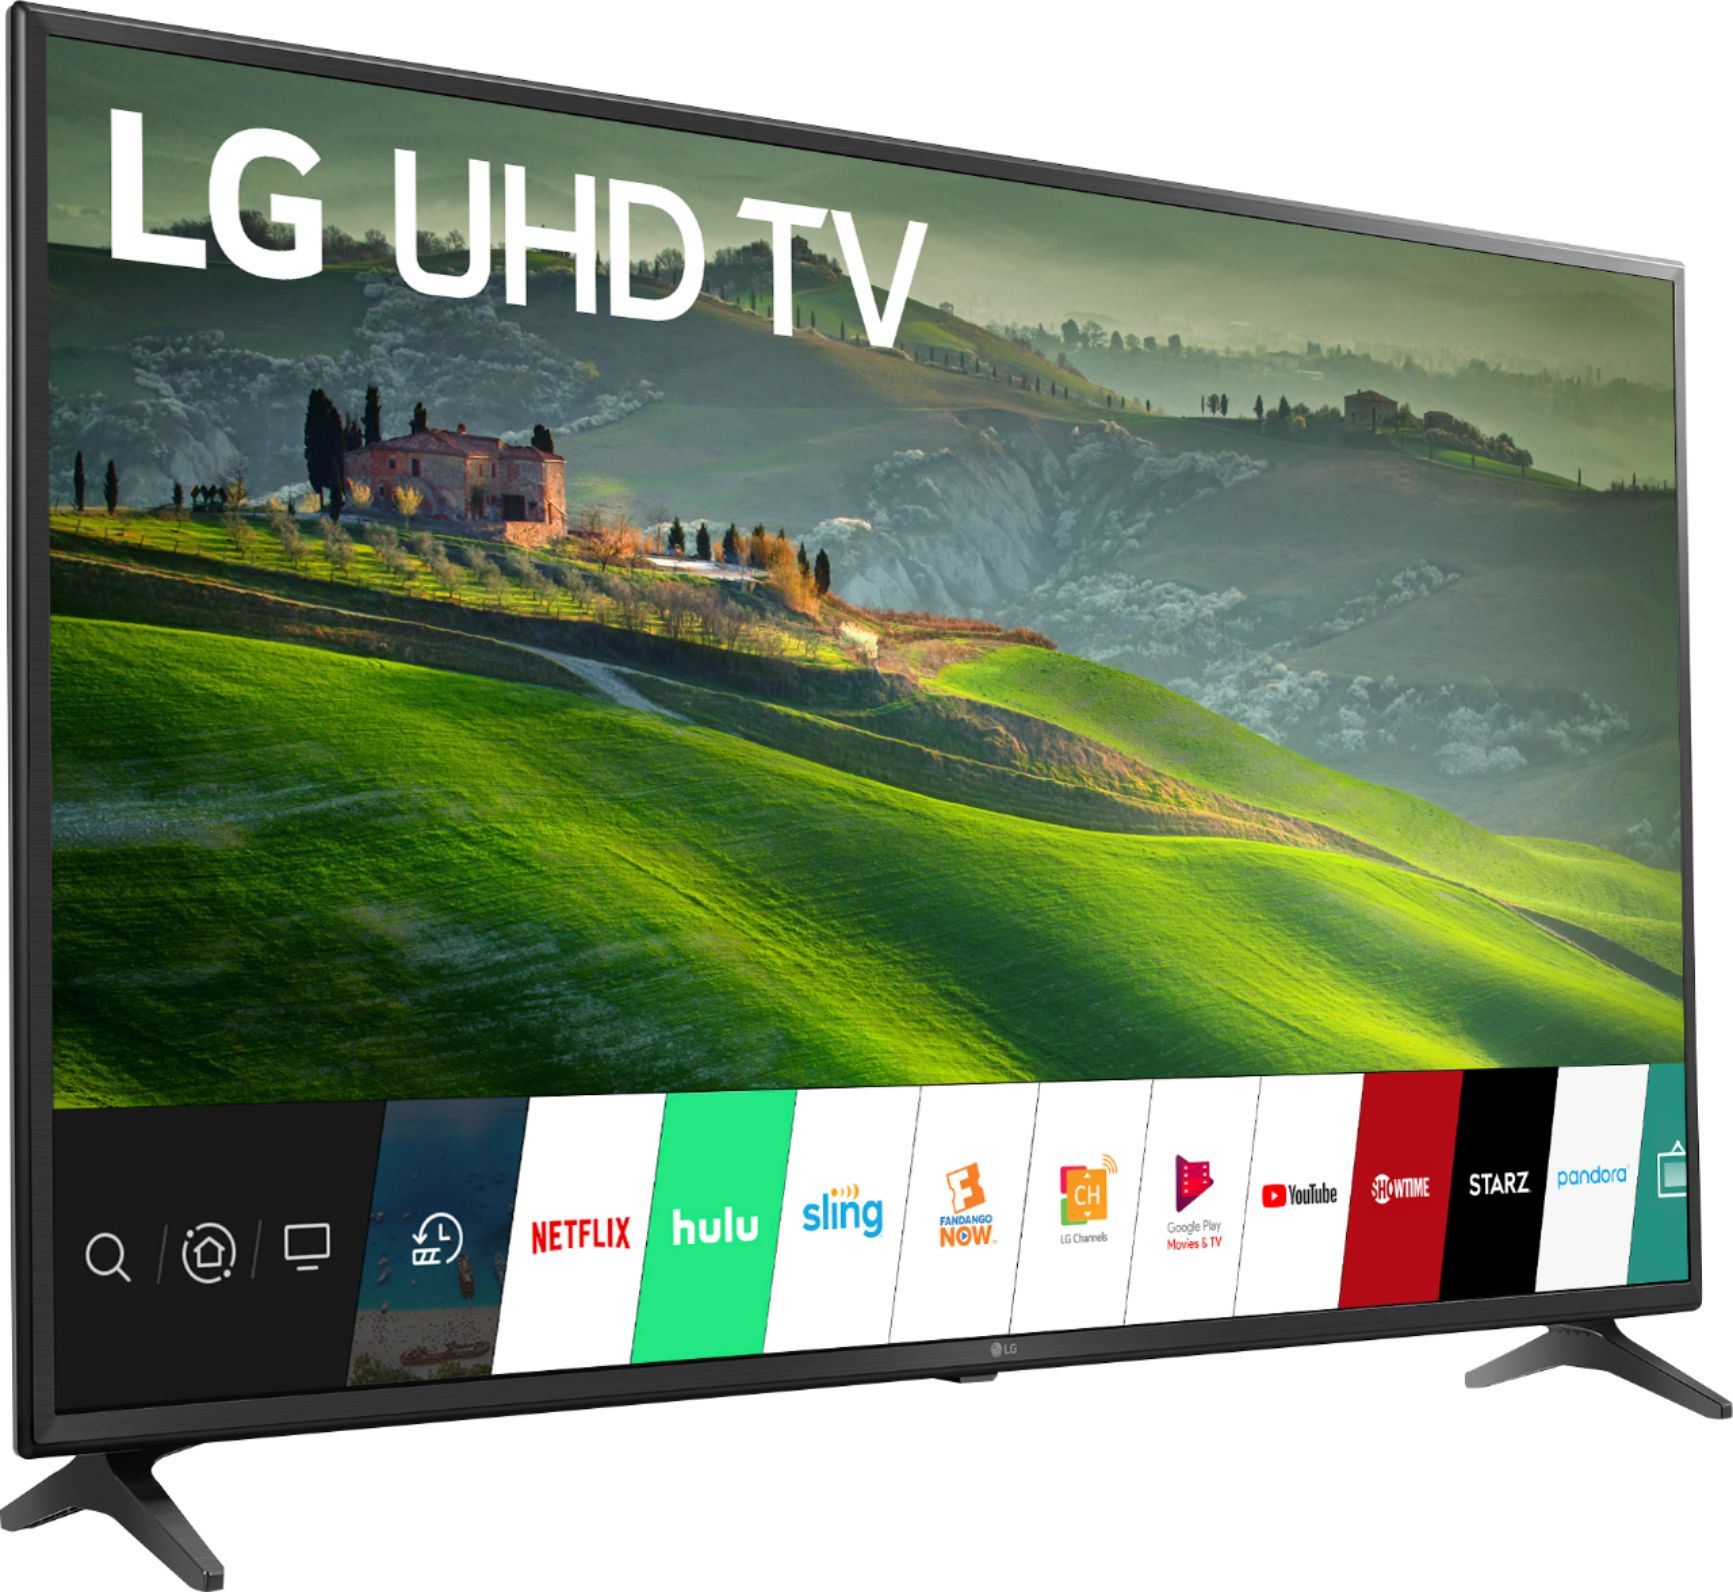 Lg 43 Class Led 6 Series 4k 2160p Smart 4k Uhd Tv With Hdr